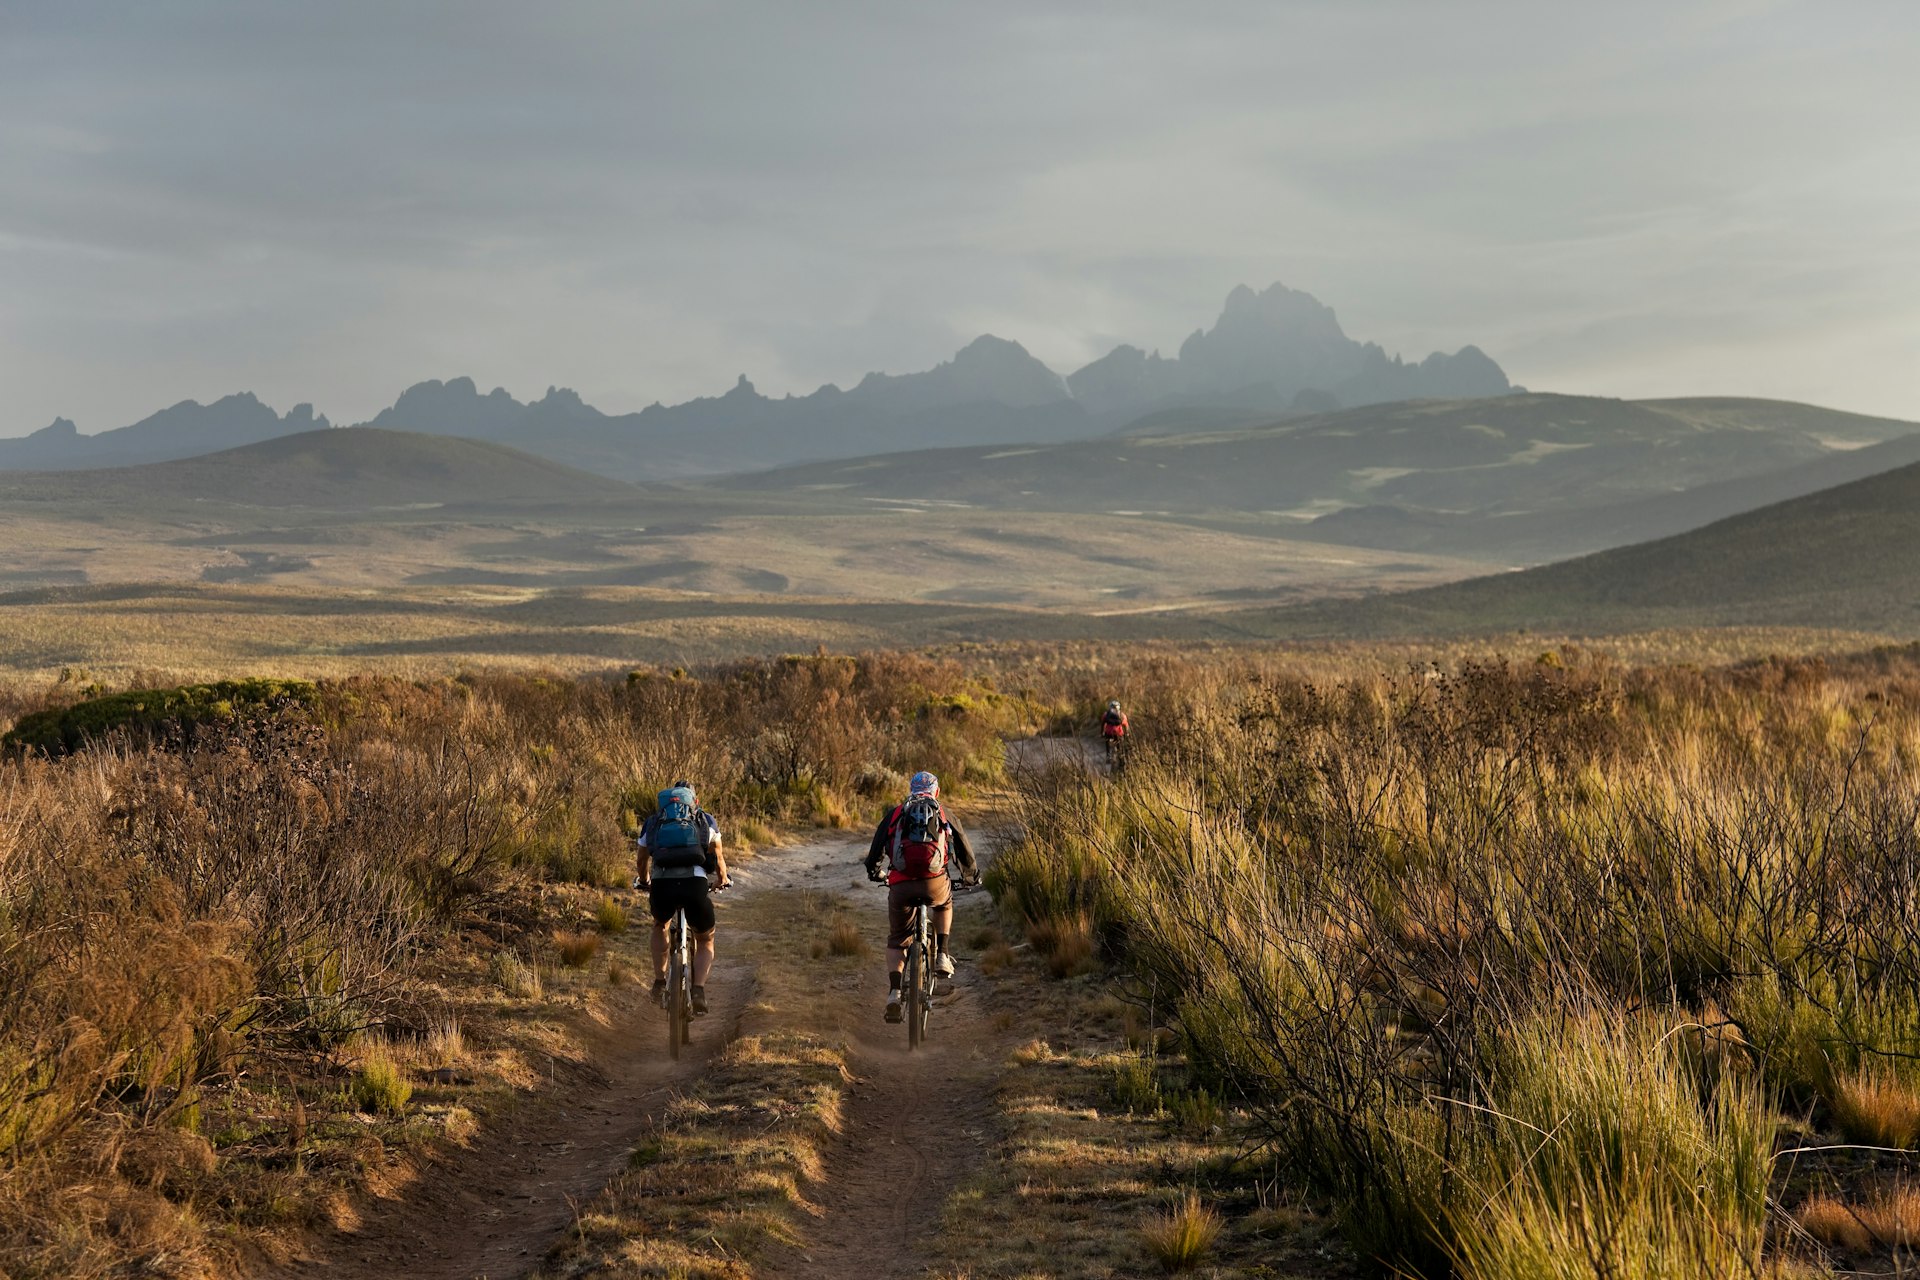 Cyclists on mountain bikes ride on a dirt trail towards a range of mountain peaks